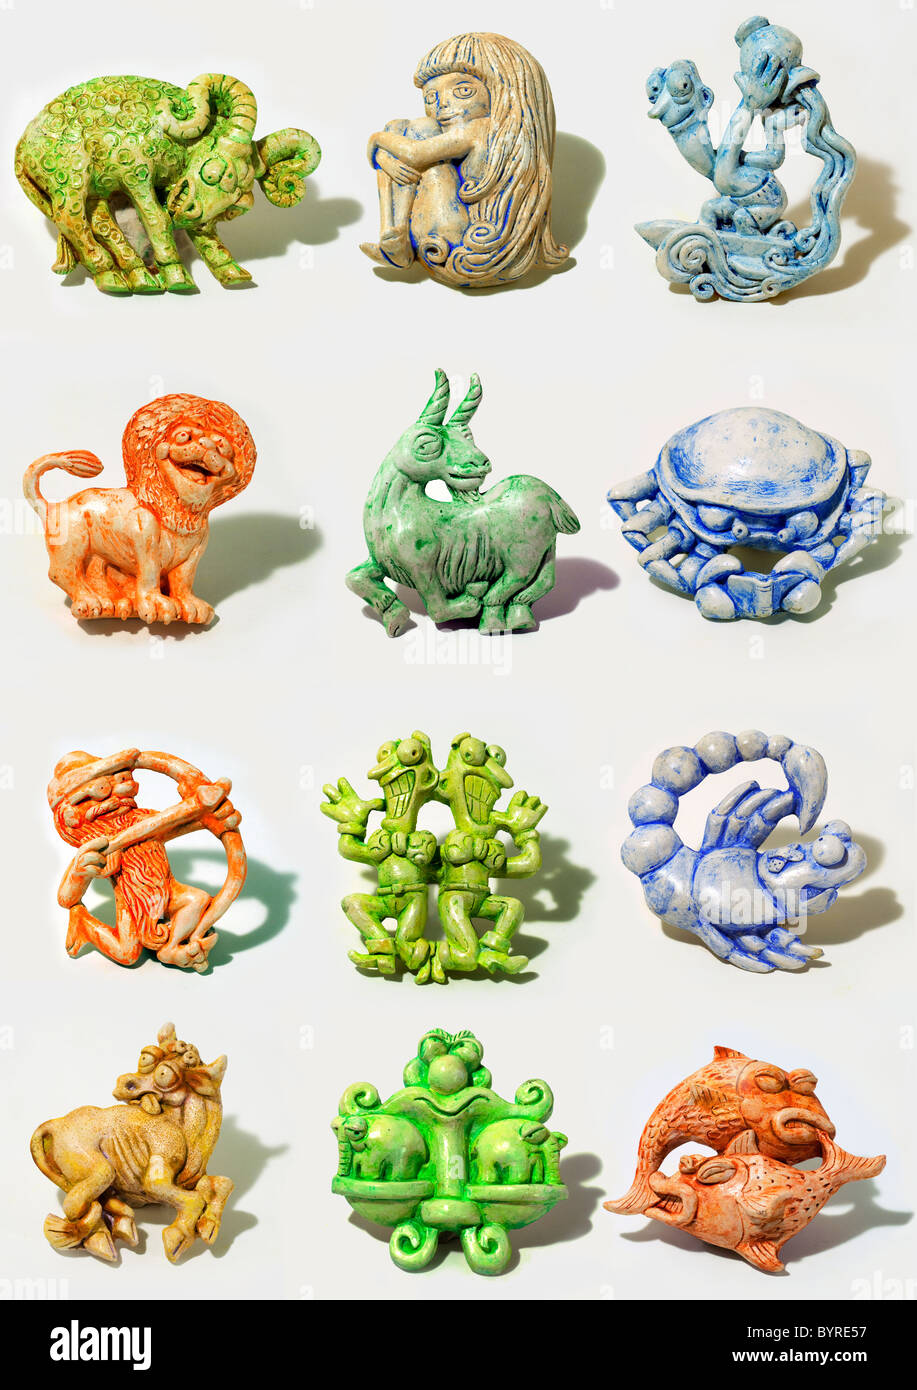 all horoscope signs sculpted in cartoon style Stock Photo